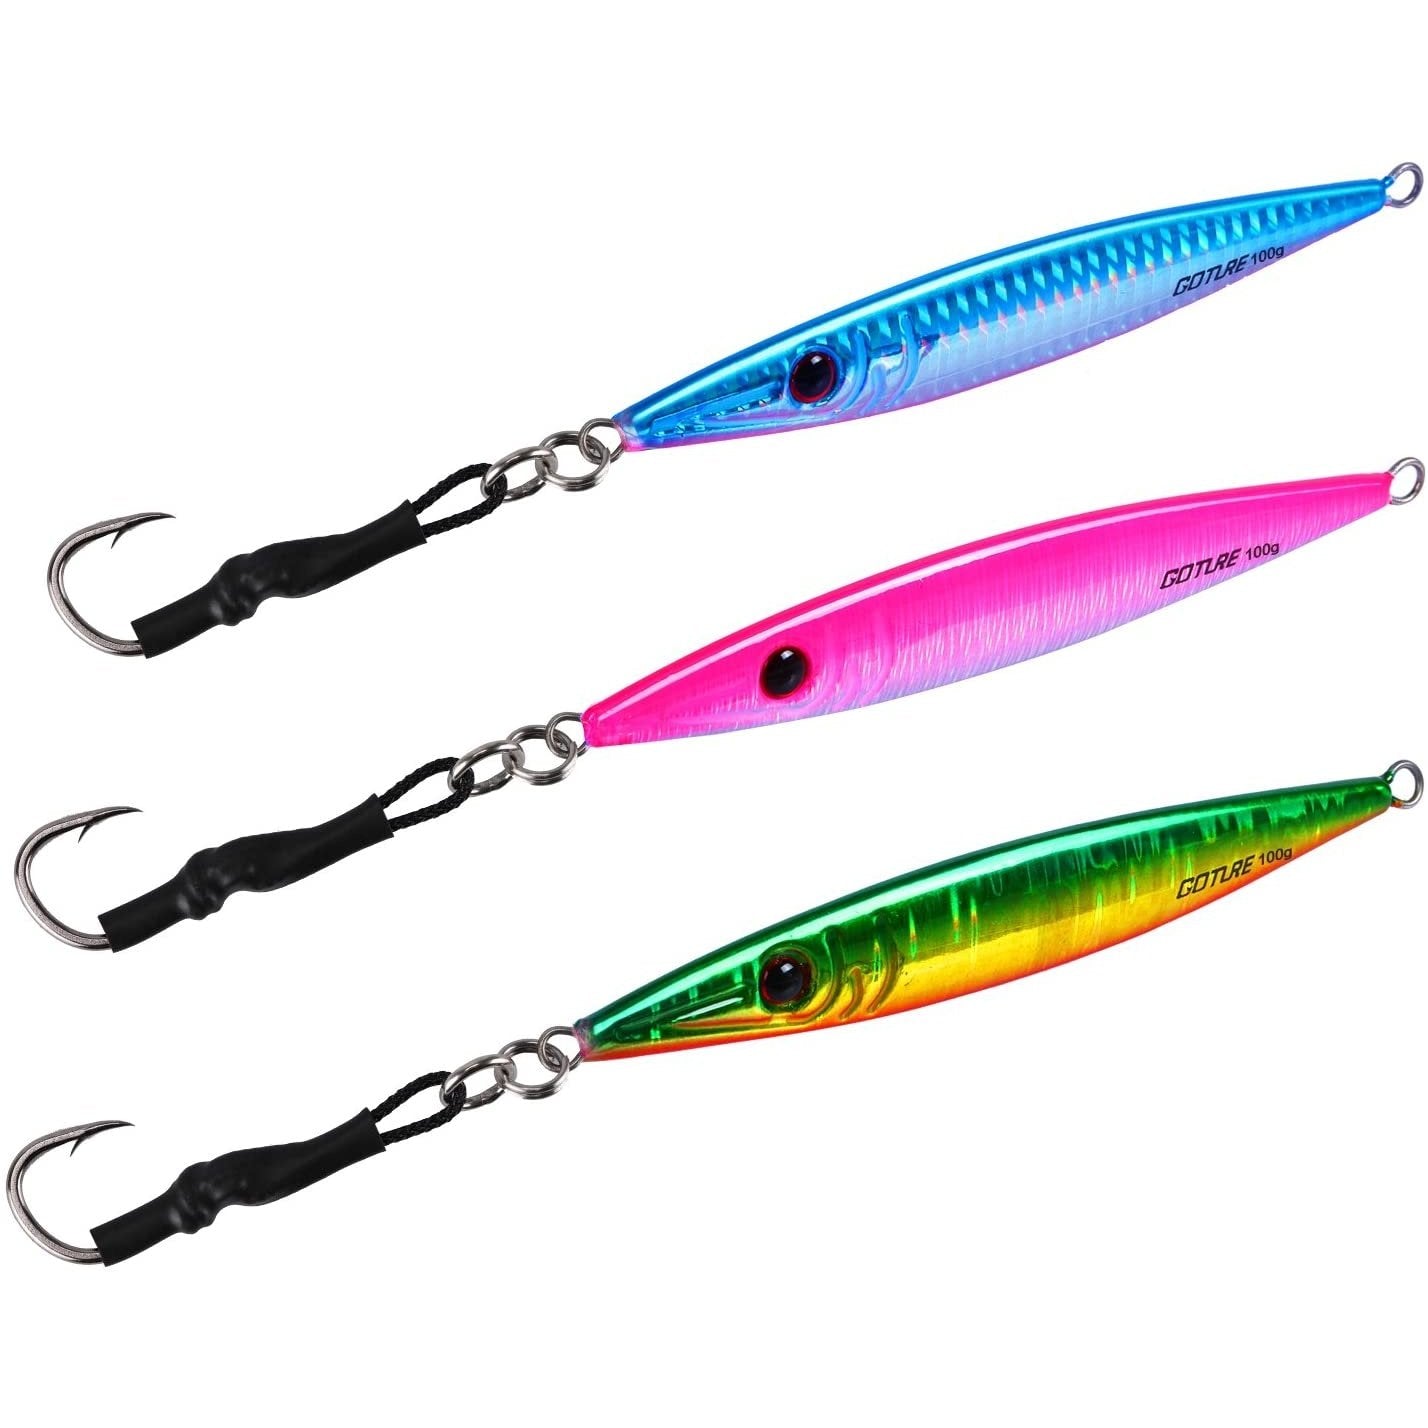  Goture Soft Fishing Lures Jig Heads, Saltwater Freshwater  Minnow Fishing Bait Big Tail